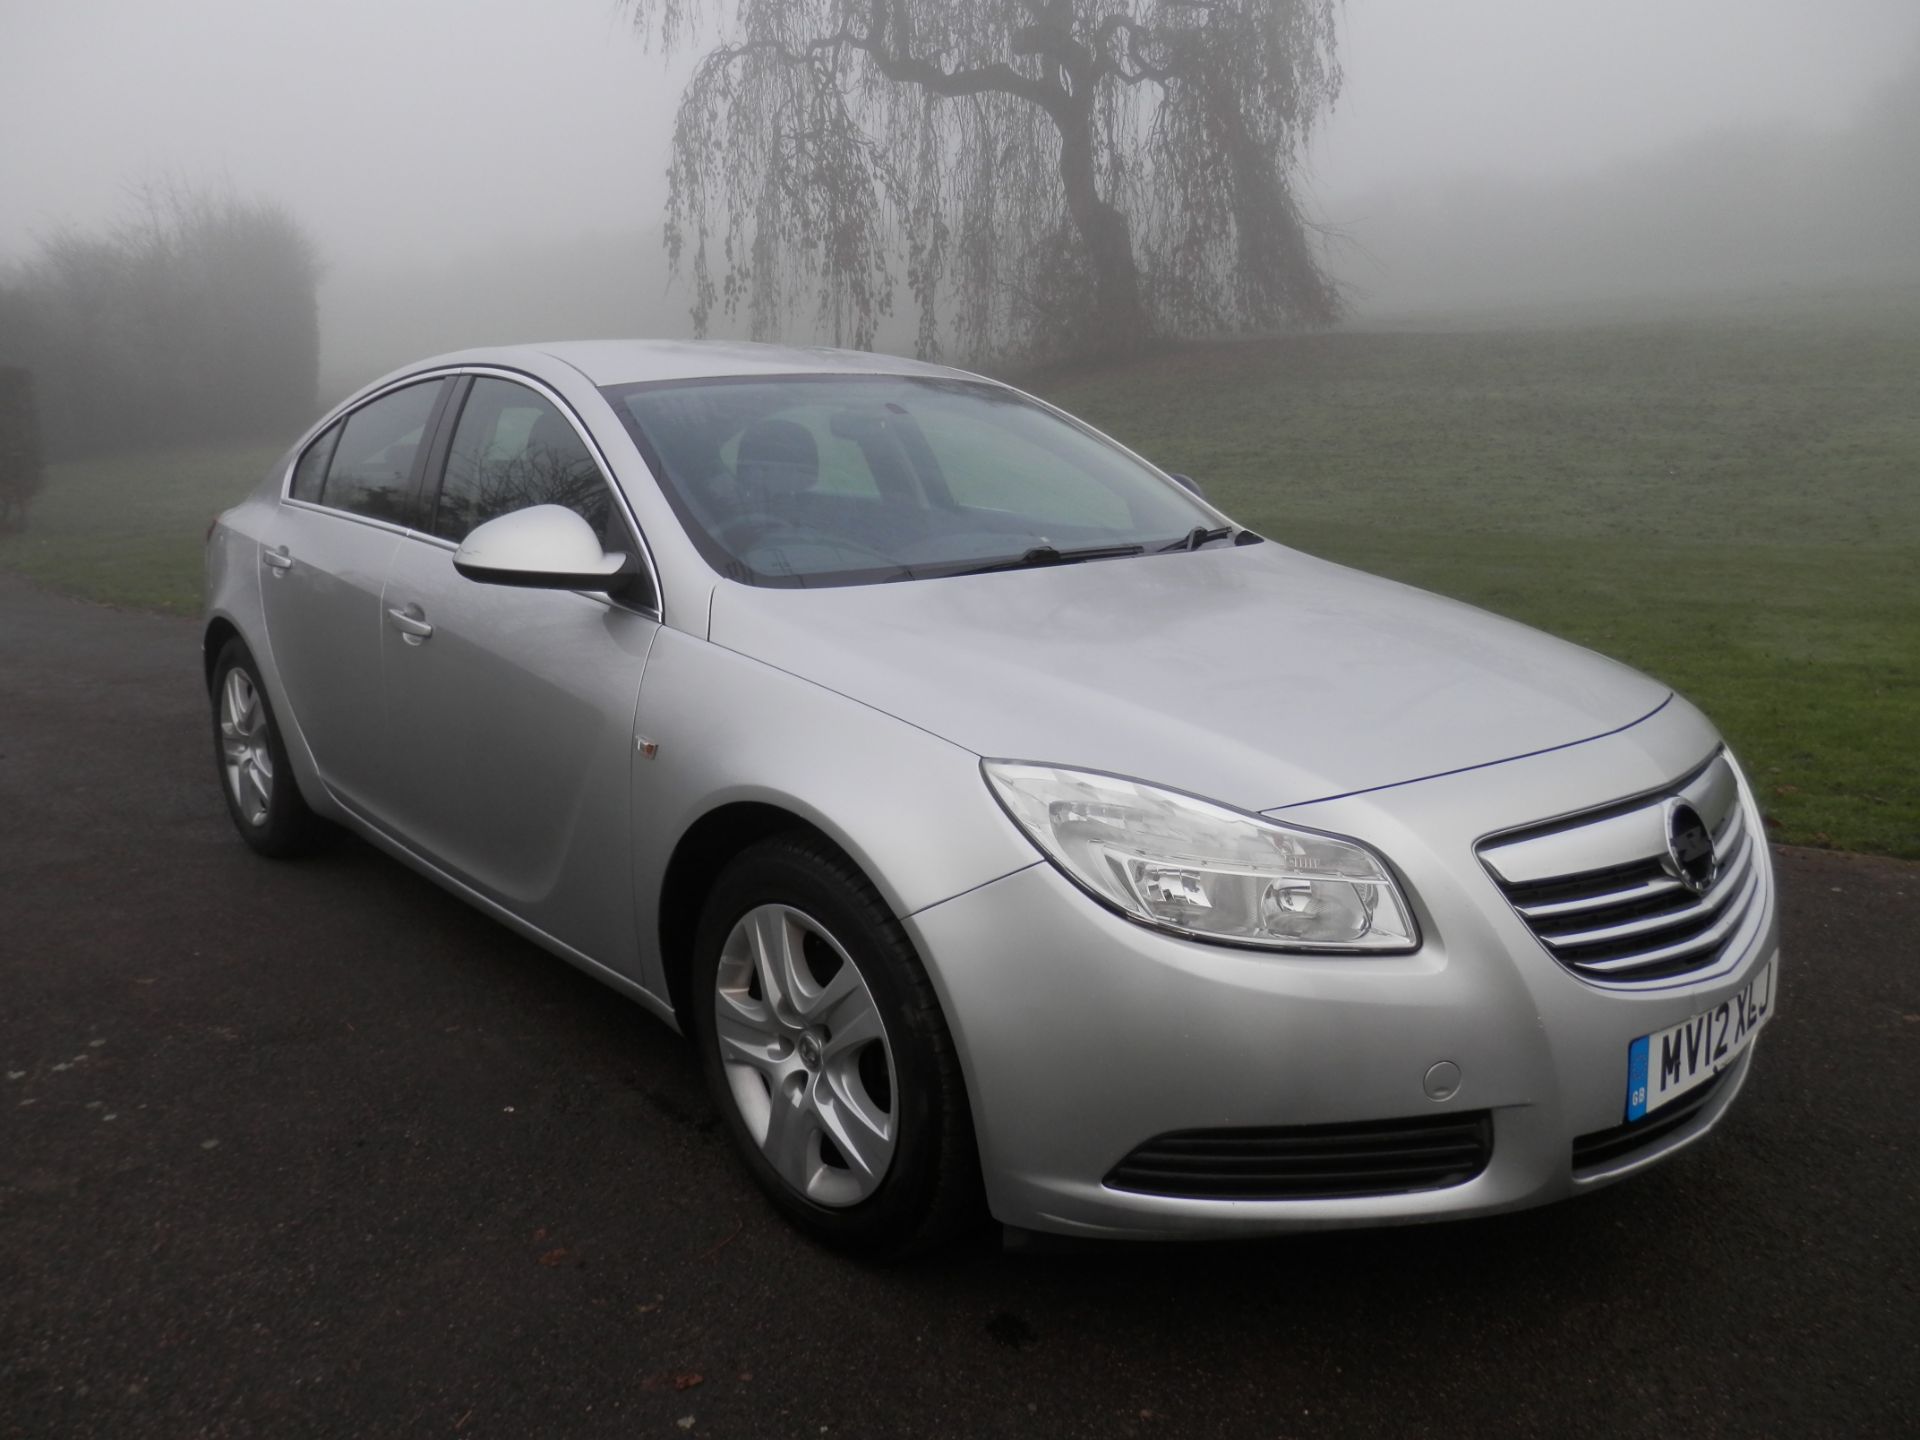 2012/12 VAUXHALL INSIGNIA EXCLUSIVE 2.0 TURBO DIESEL, MOT MARCH 2017, 6 SPEED MANUAL.